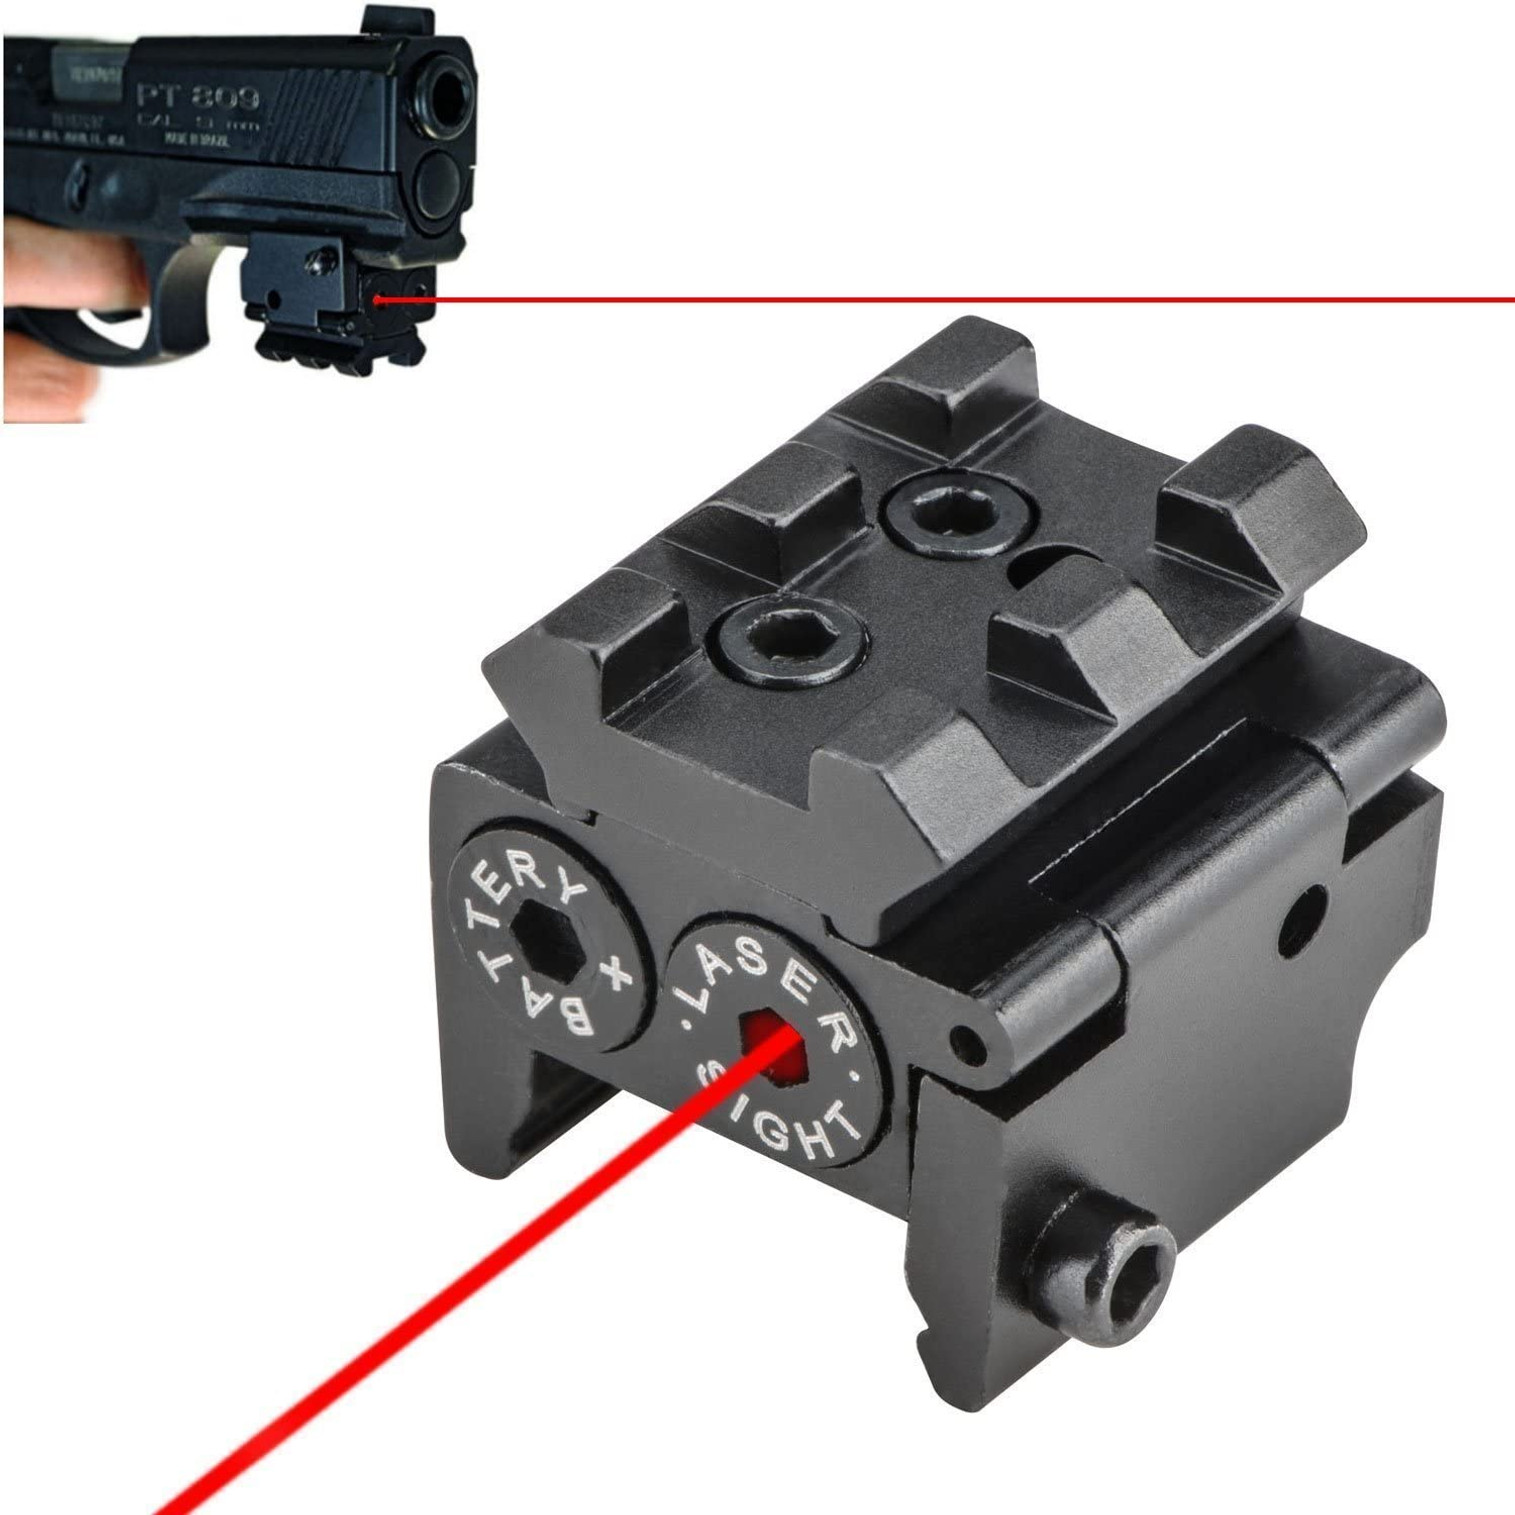 ACM Mini Red Laser Sight for Weaver or Picatinny Rail (Rear Button)